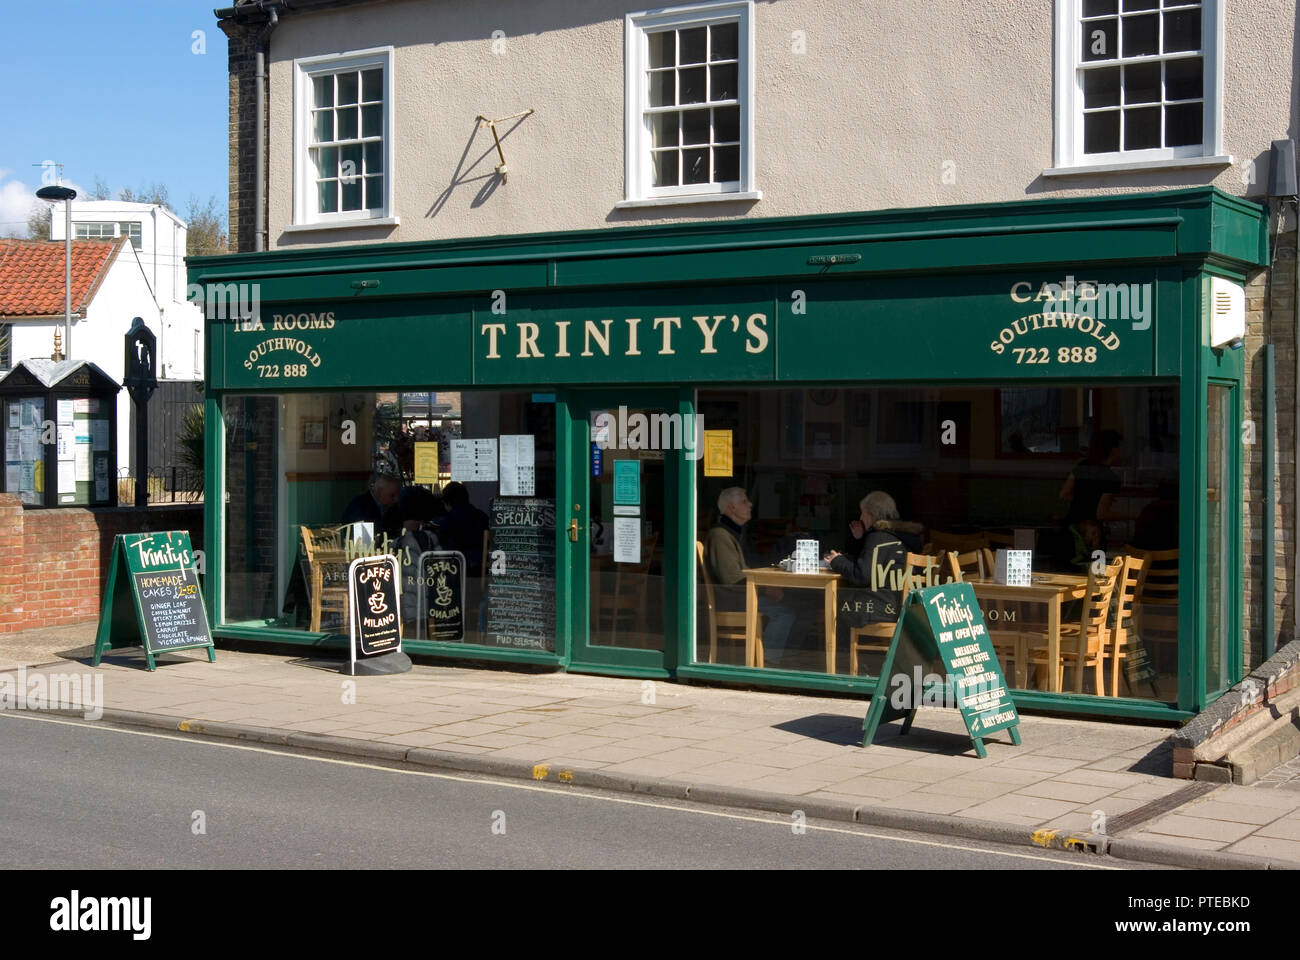 Trinity's Tearoom and Cafe, Southwold Stock Photo